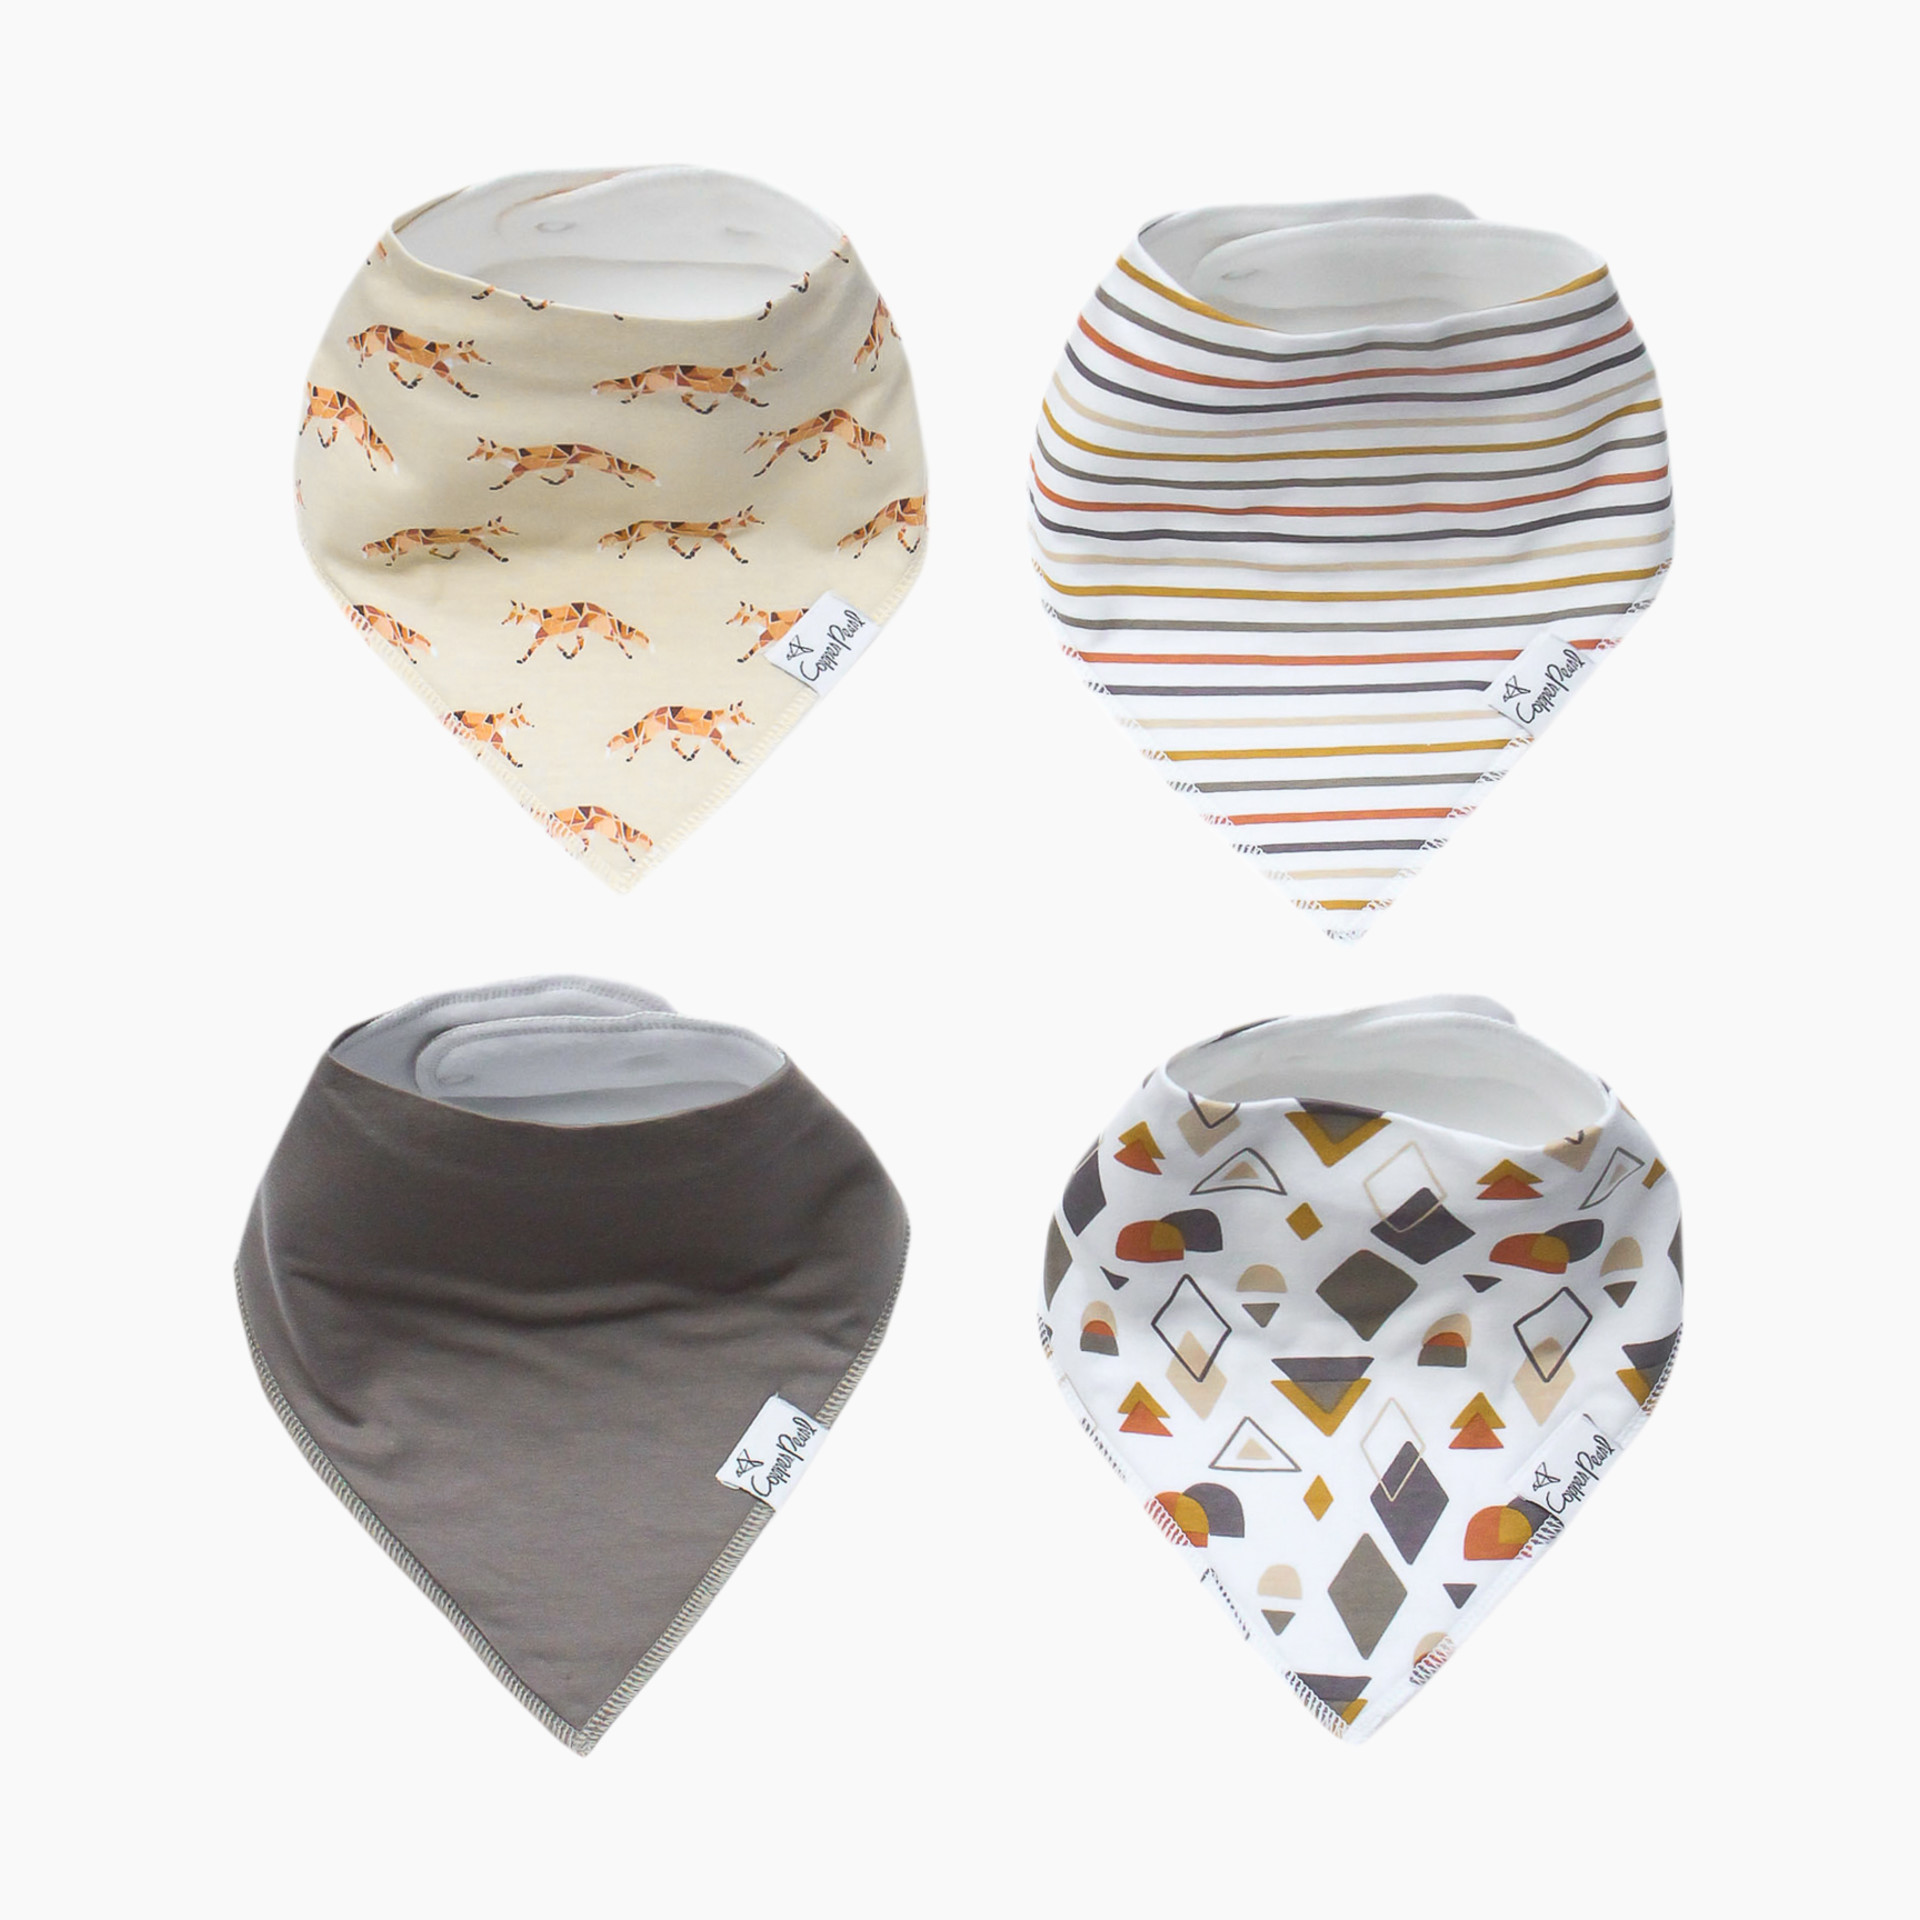  Customer reviews: Copper Pearl Baby Bandana Drool Bibs for  Drooling and Teething 4 Pack Gift Set Indie, Soft Set of Cloth Bandana Bibs  for Any Baby Girl or Boy, Cute Registry